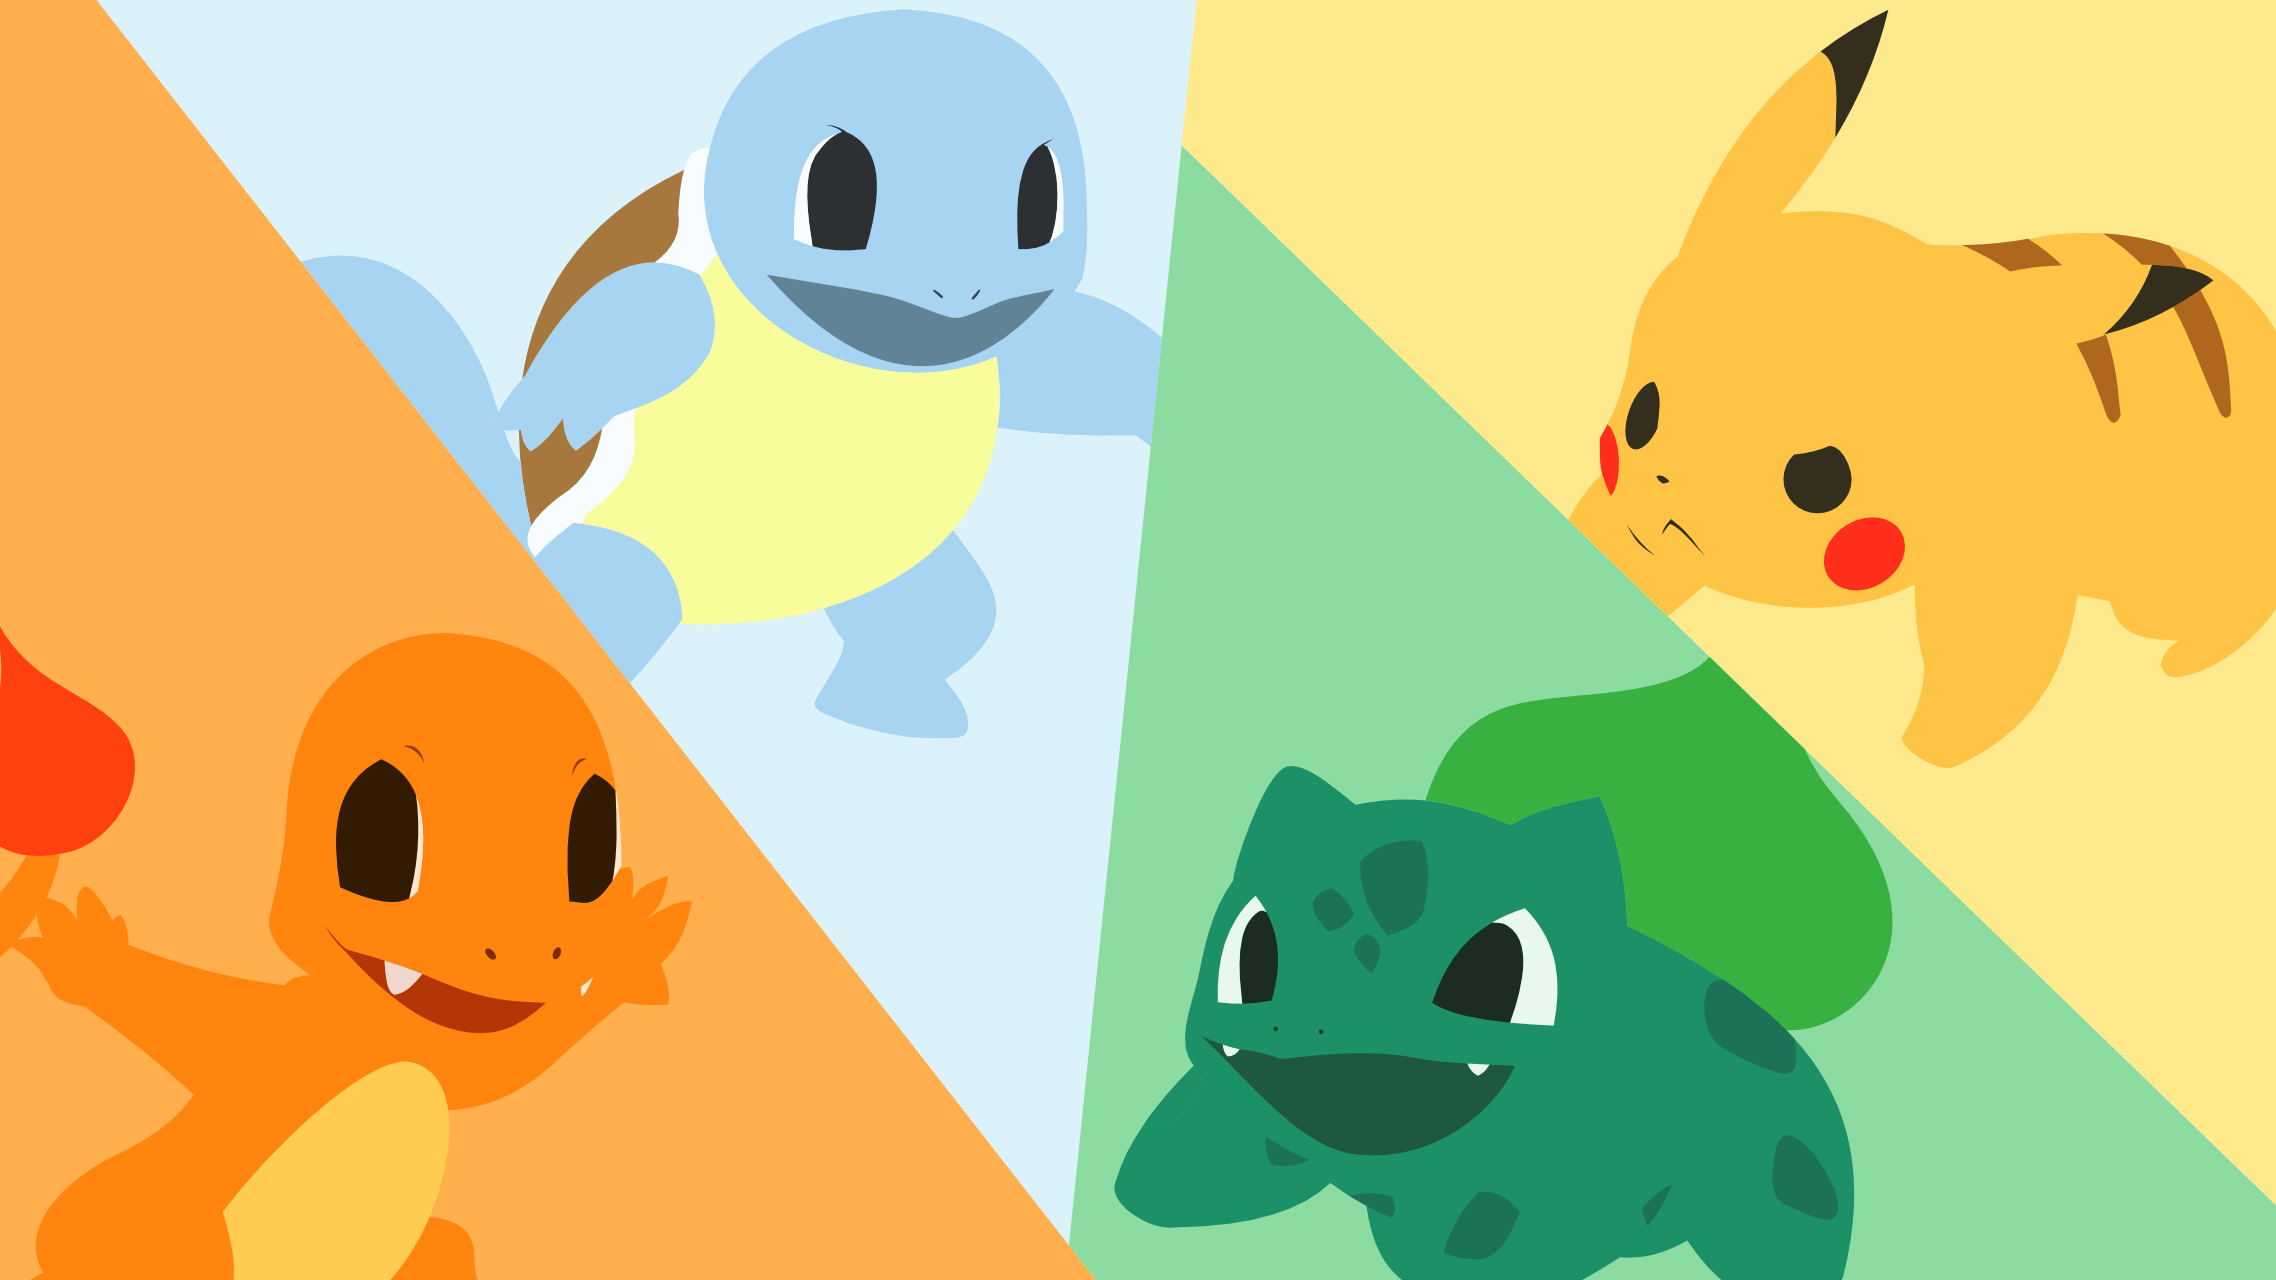 My childhood in OC gaming wallpaper. Character wallpaper, Pokemon, Gaming wallpaper